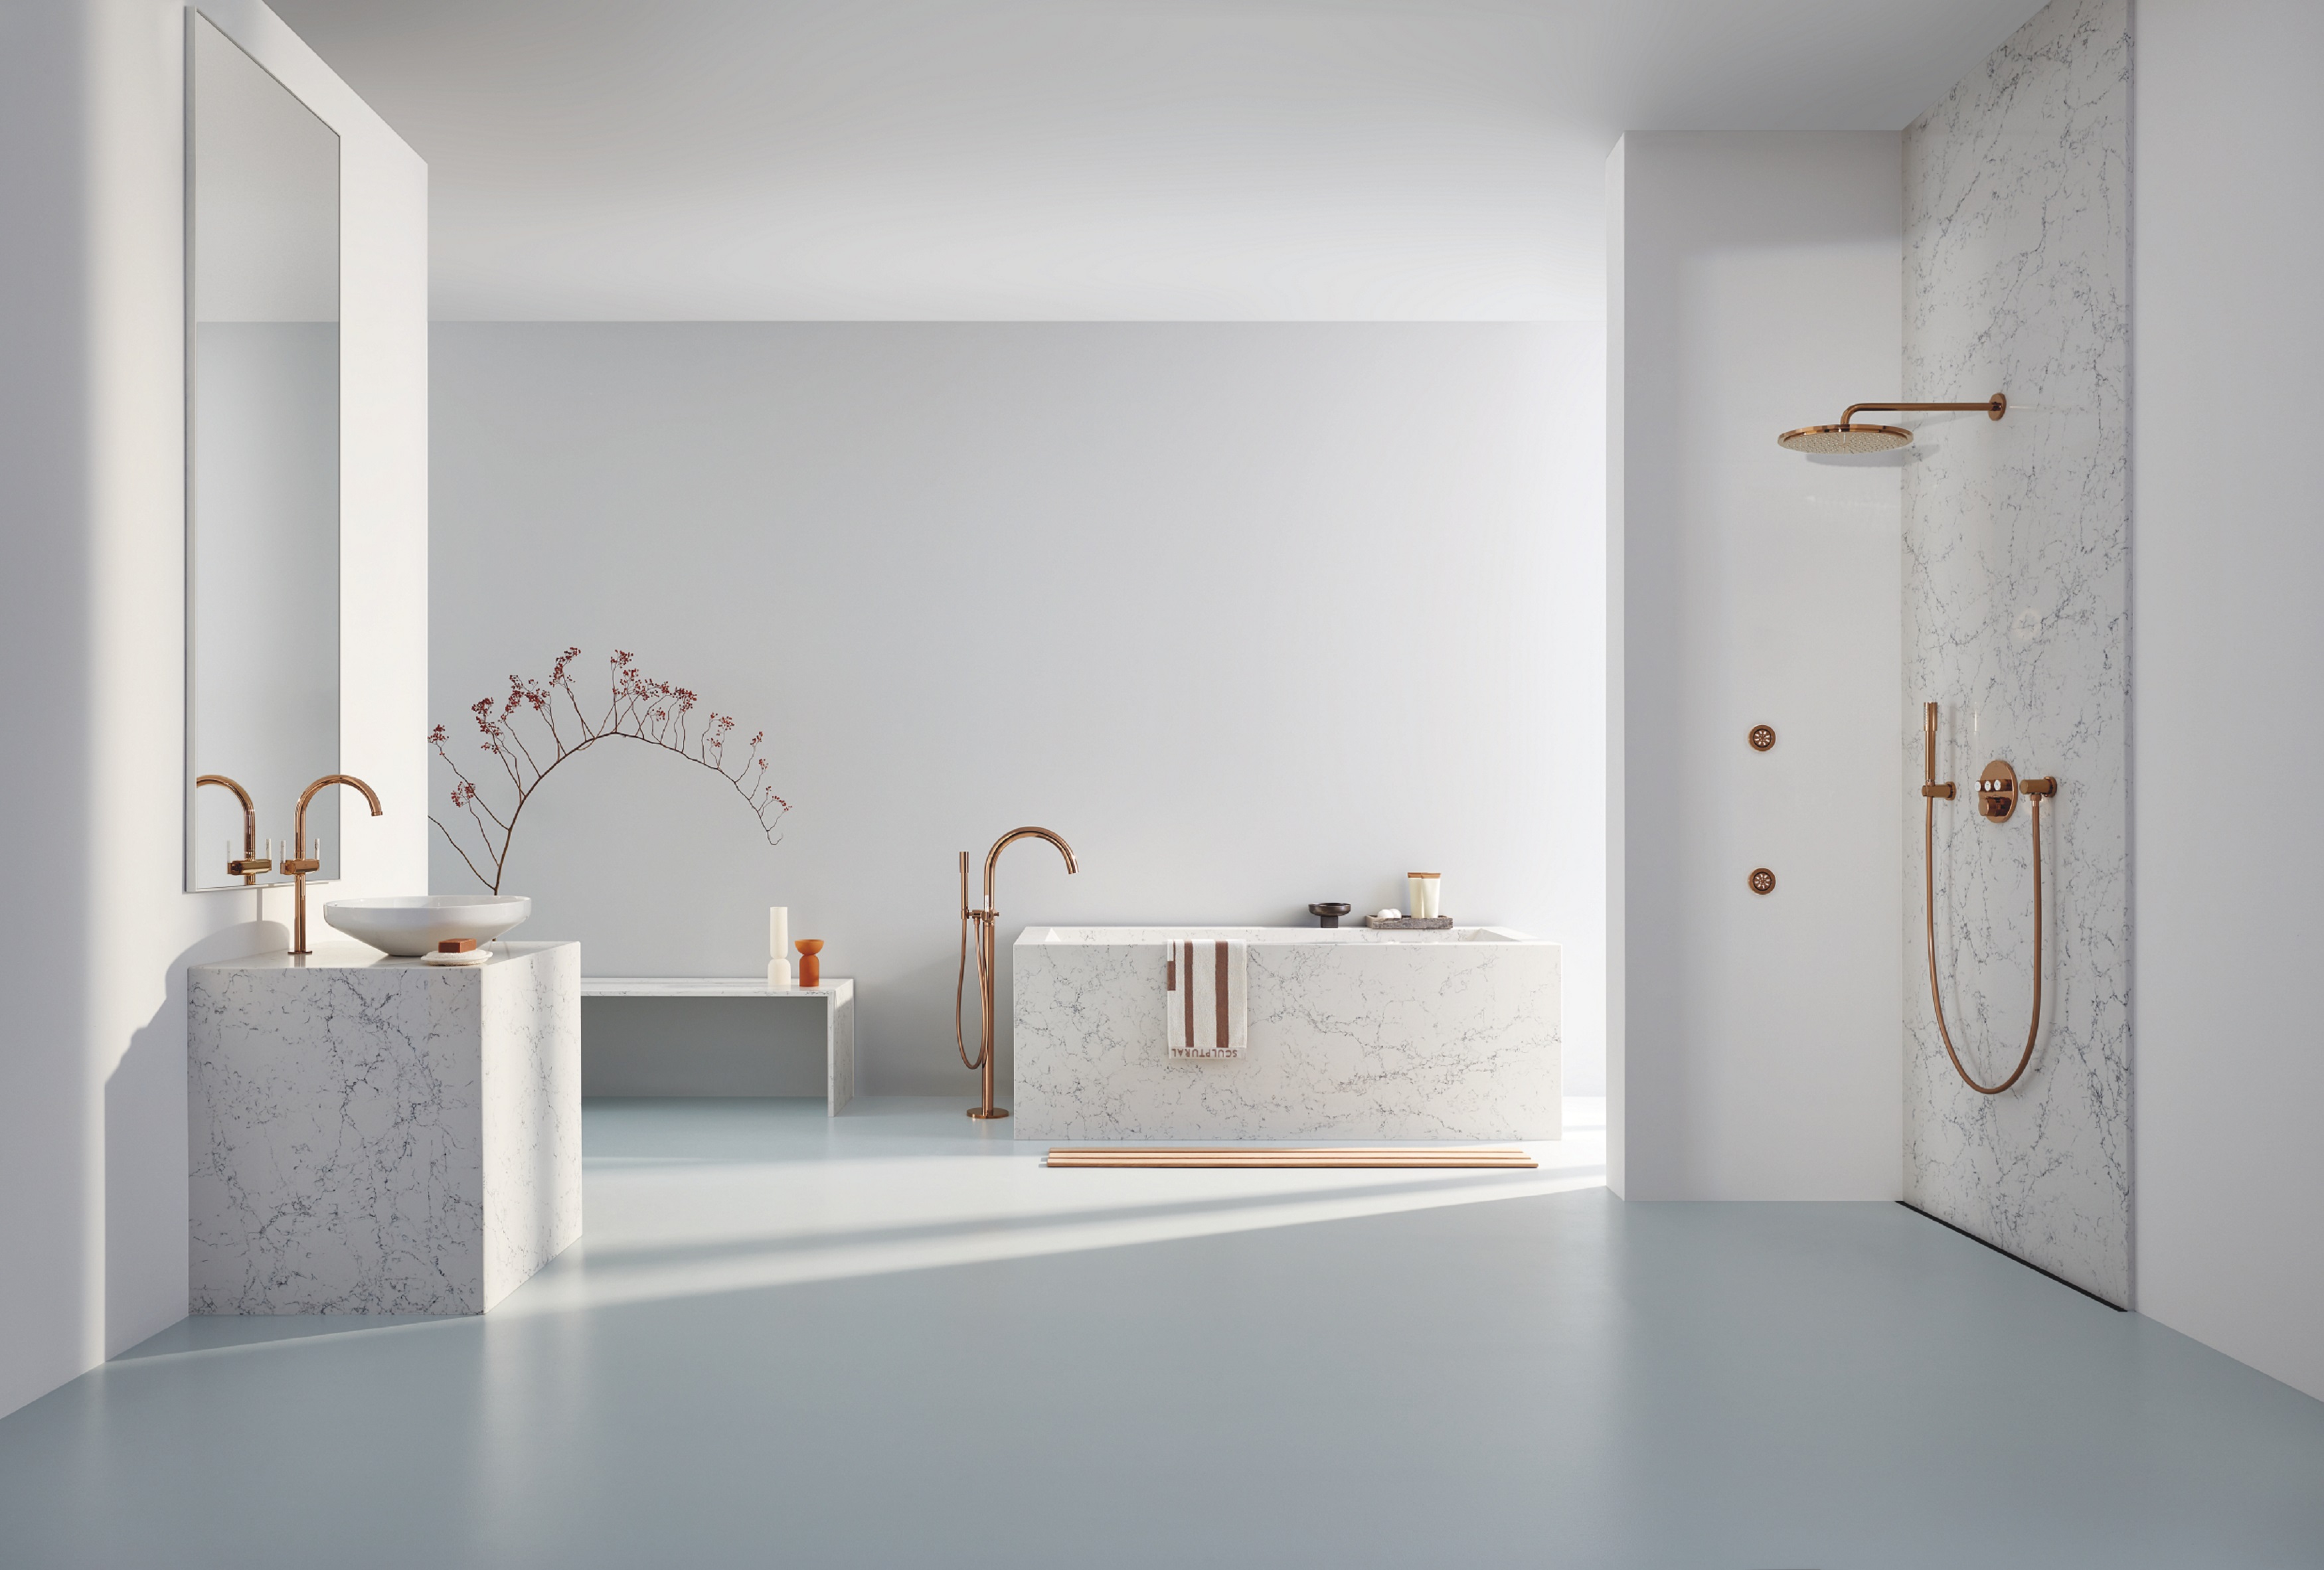 https://www.grohe-x.com/-/media/grohe/images/newsroom/newsroom-international/int_bathroom/grohe_atrio-private-collection_warm-sunset_full-bathroom_mood.ashx